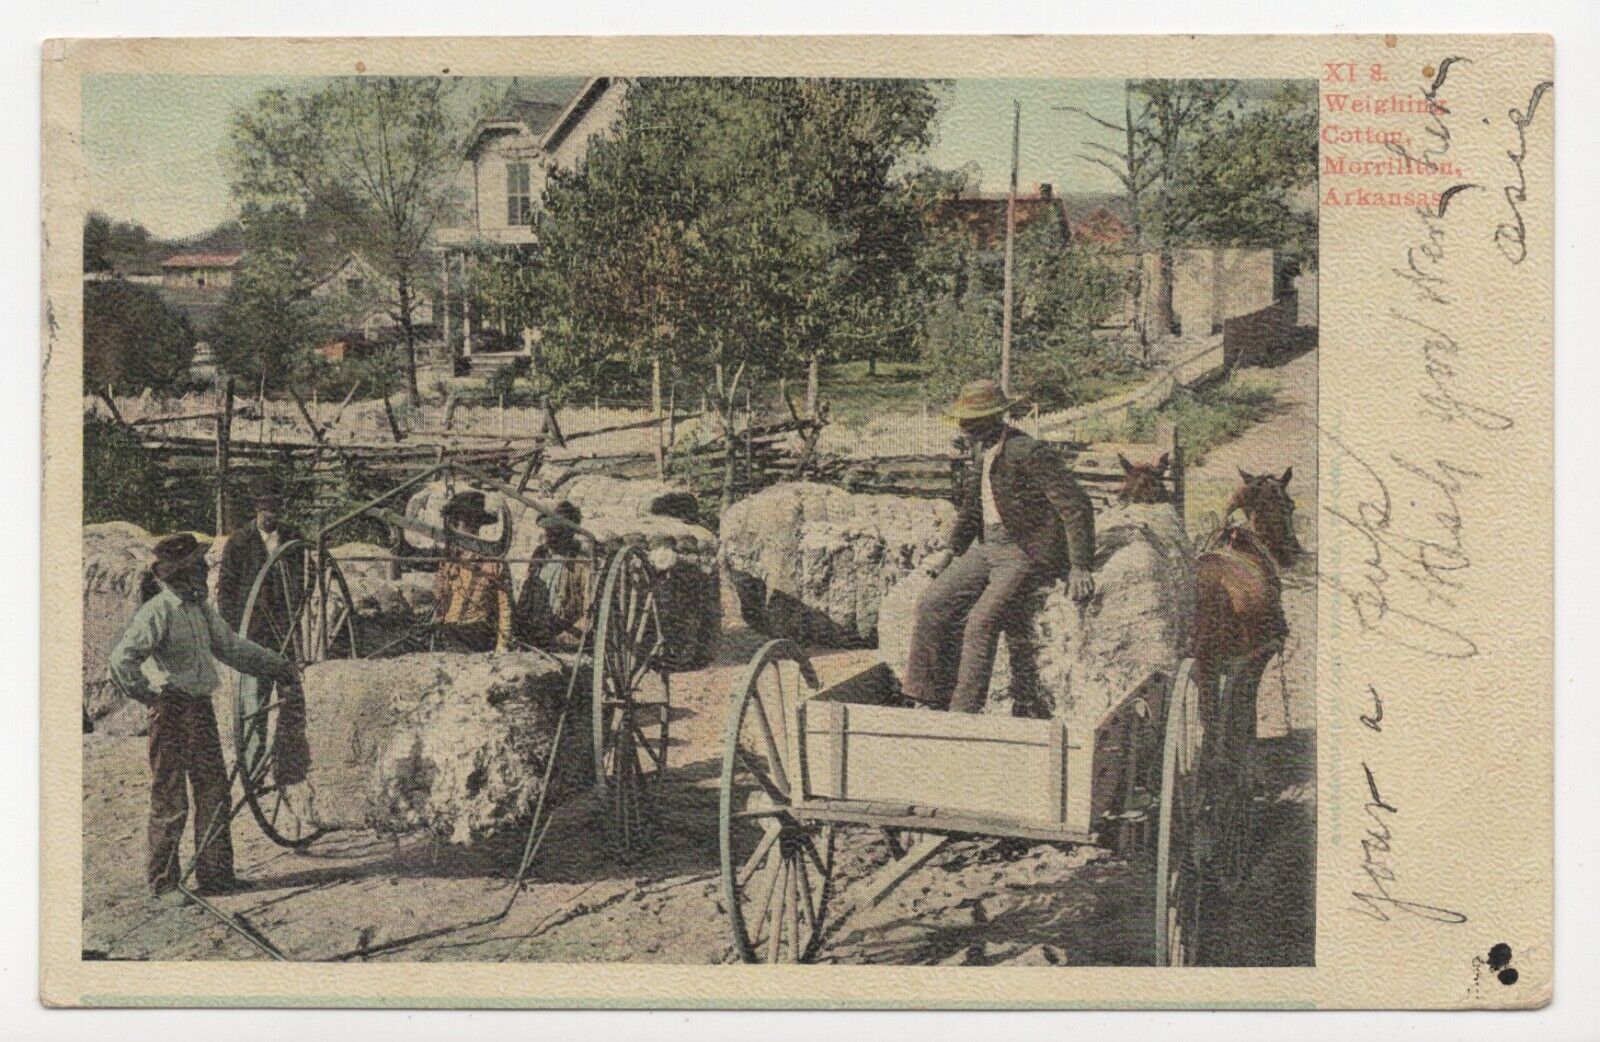 Weighing Cotton Morrilton Arkansas Undivided Back Posted 1906  Postcard